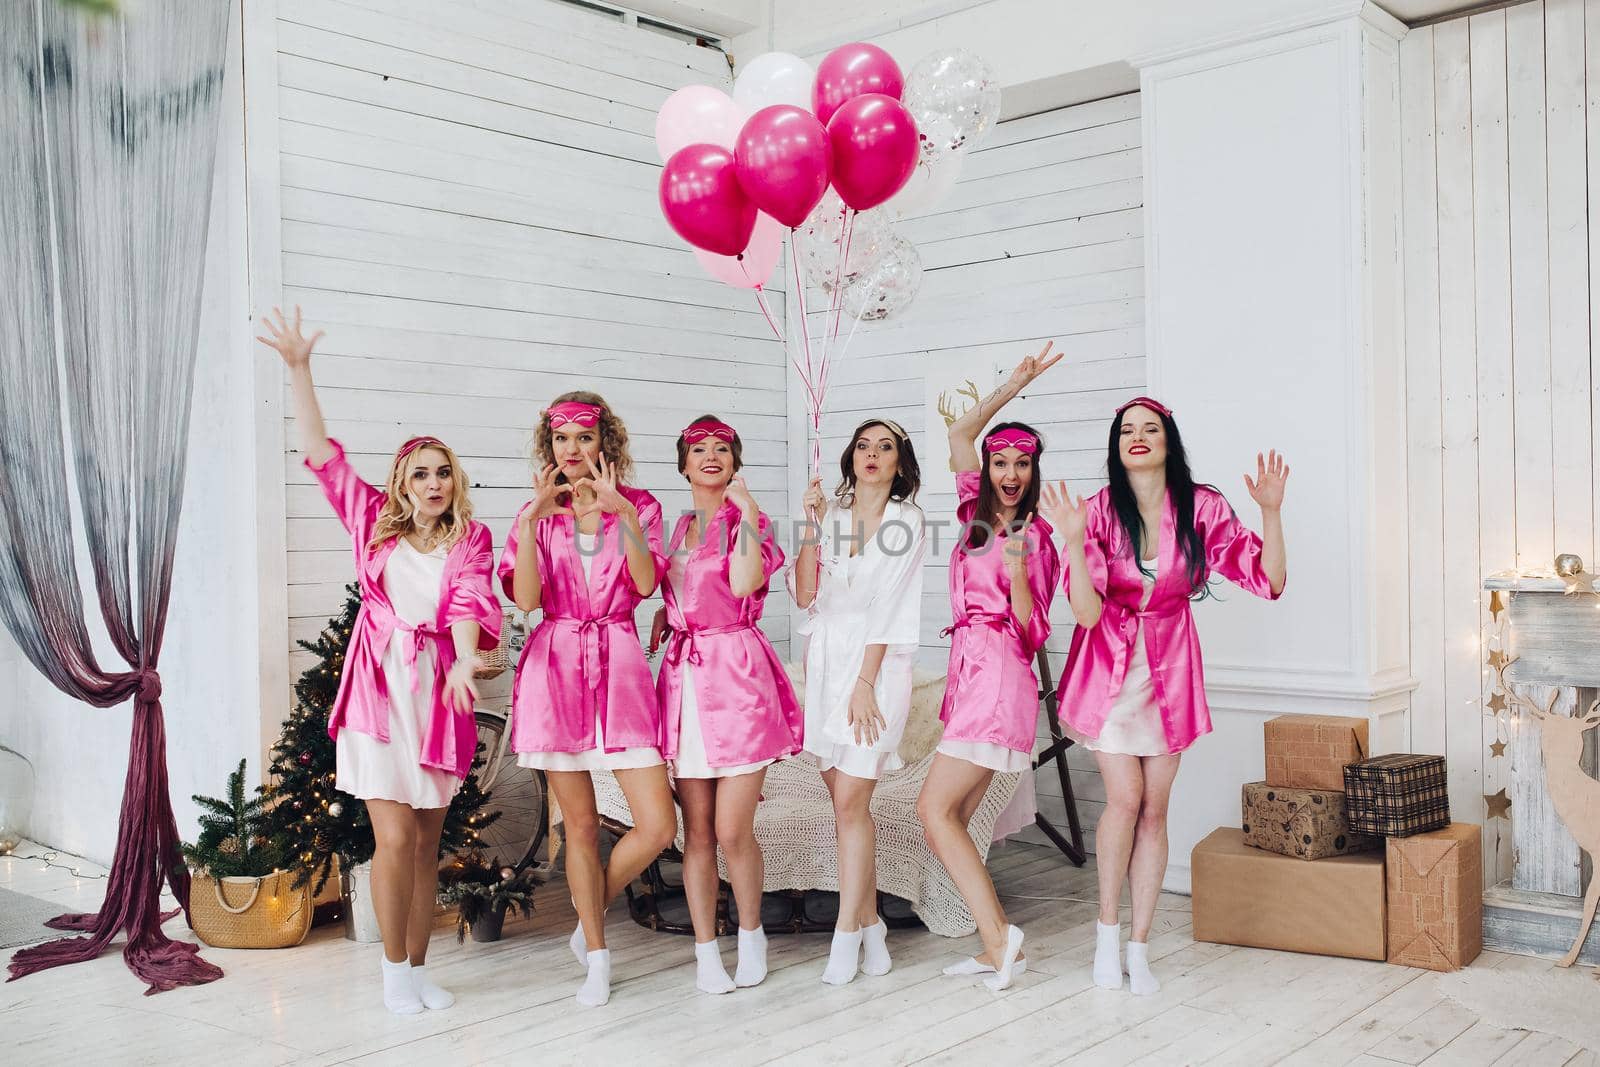 Bridesmaids and bride having fun at bachelorette party. by StudioLucky